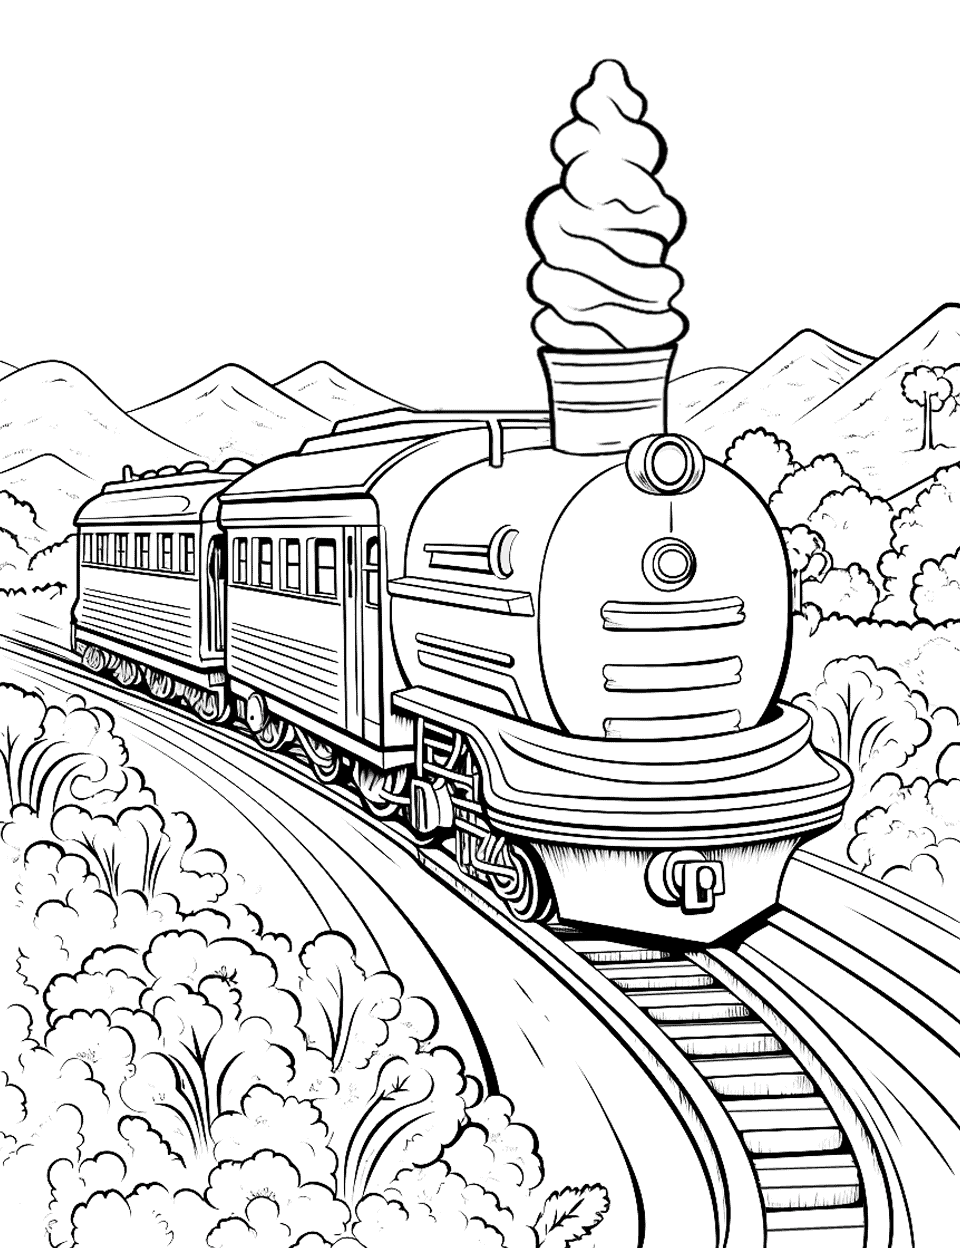 Ice Cream Train Journey Coloring Page - A train carrying delicious ice cream cargo through beautiful landscapes.